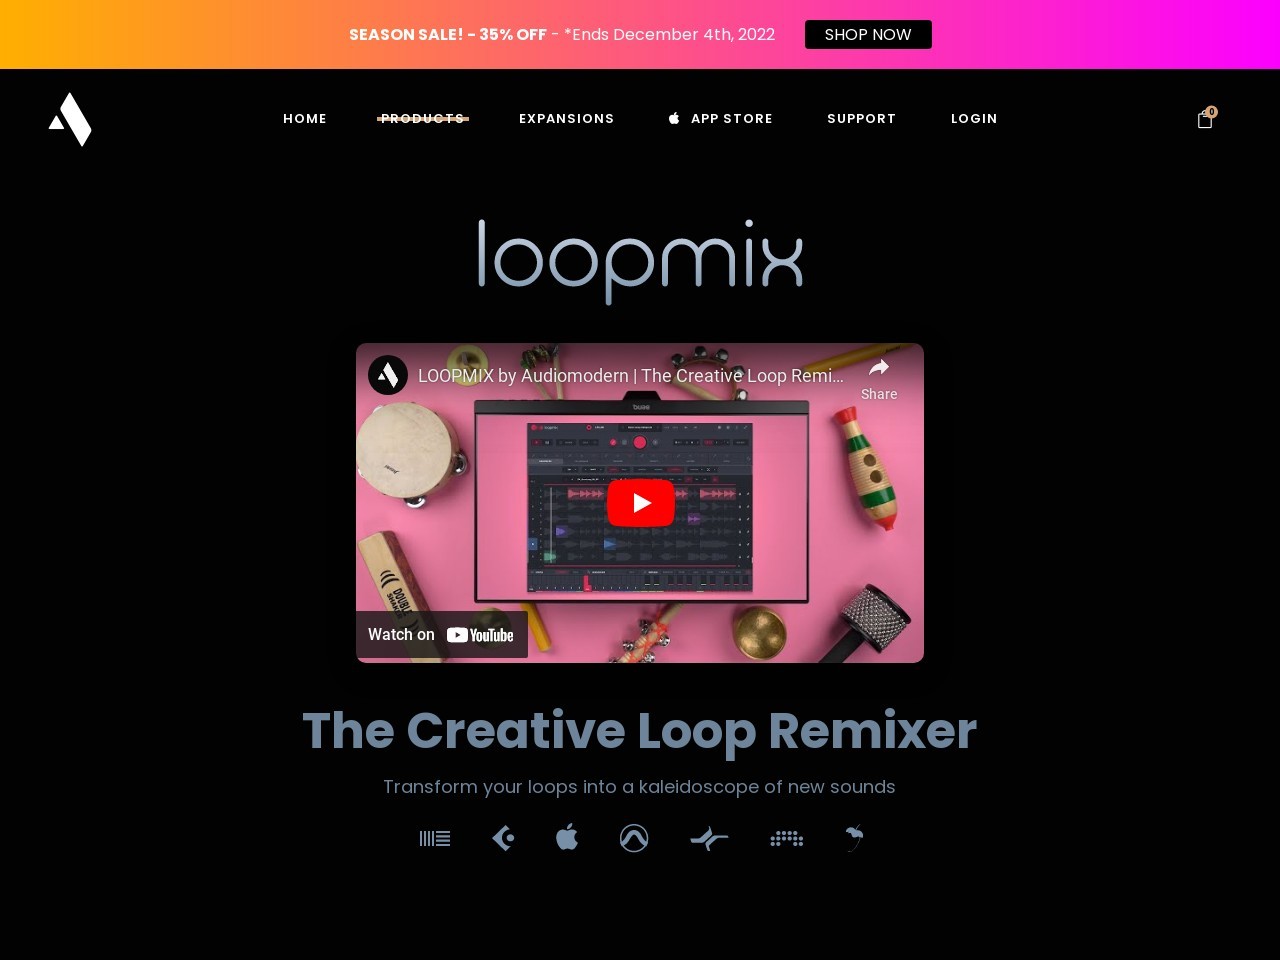 Loopmix by Audiomodern | The Creative Loop Remixer